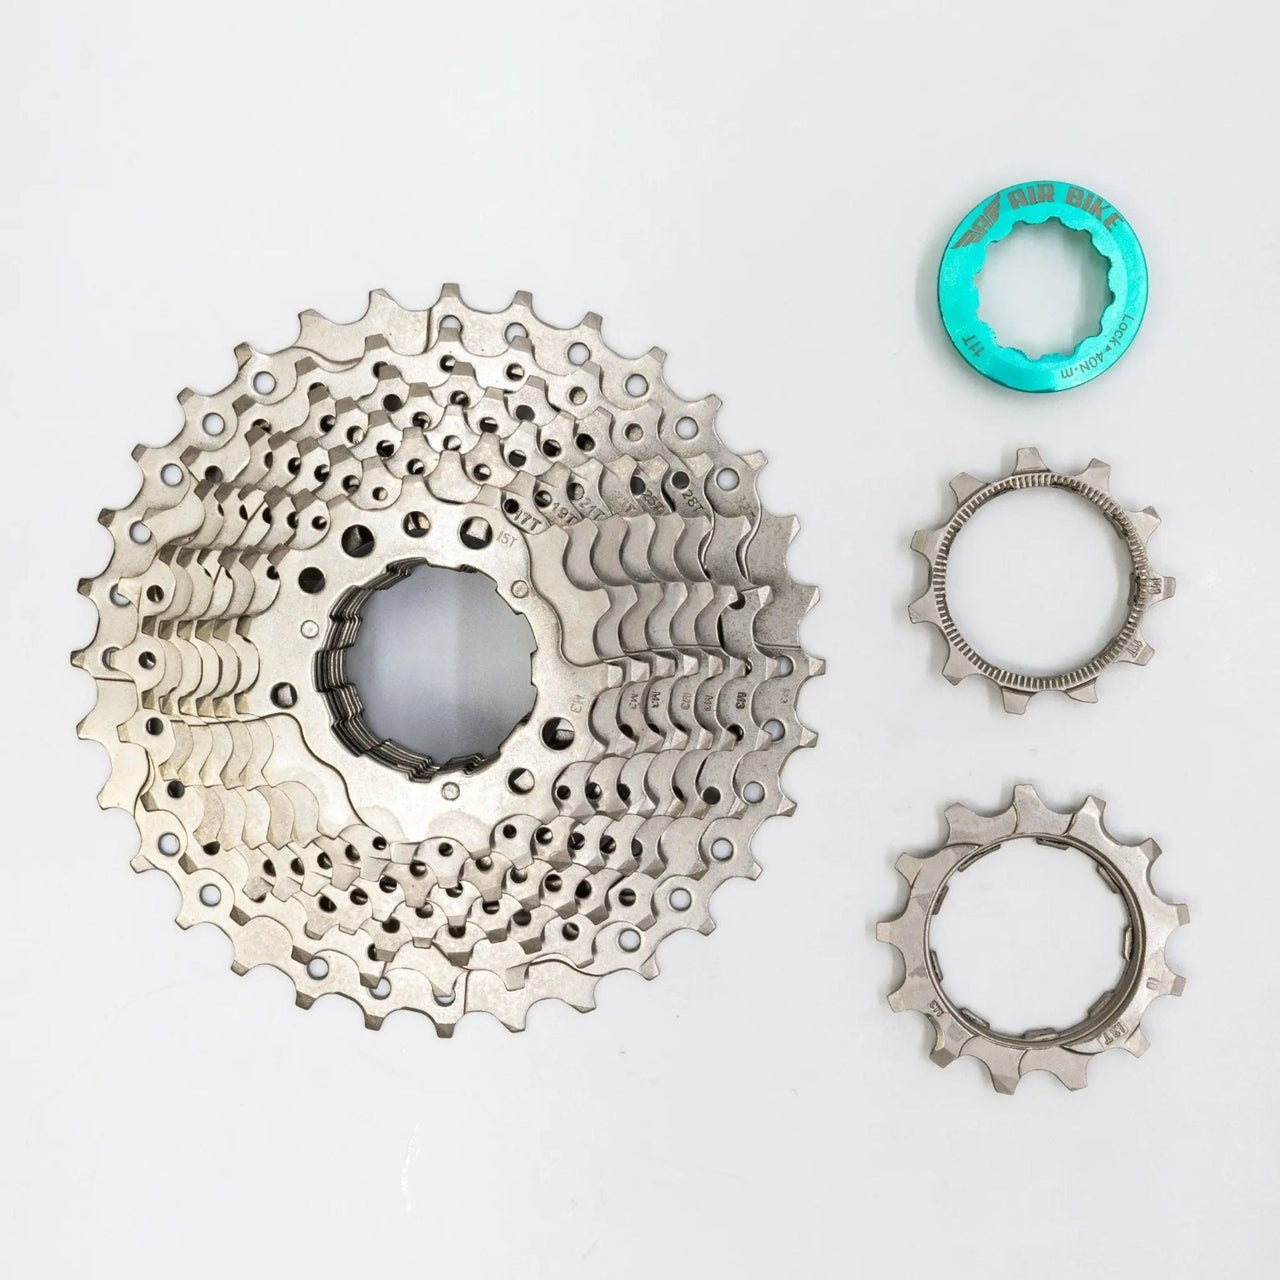 Quick Shipping: Shimano 10-Speed 11-32T Cassette Available